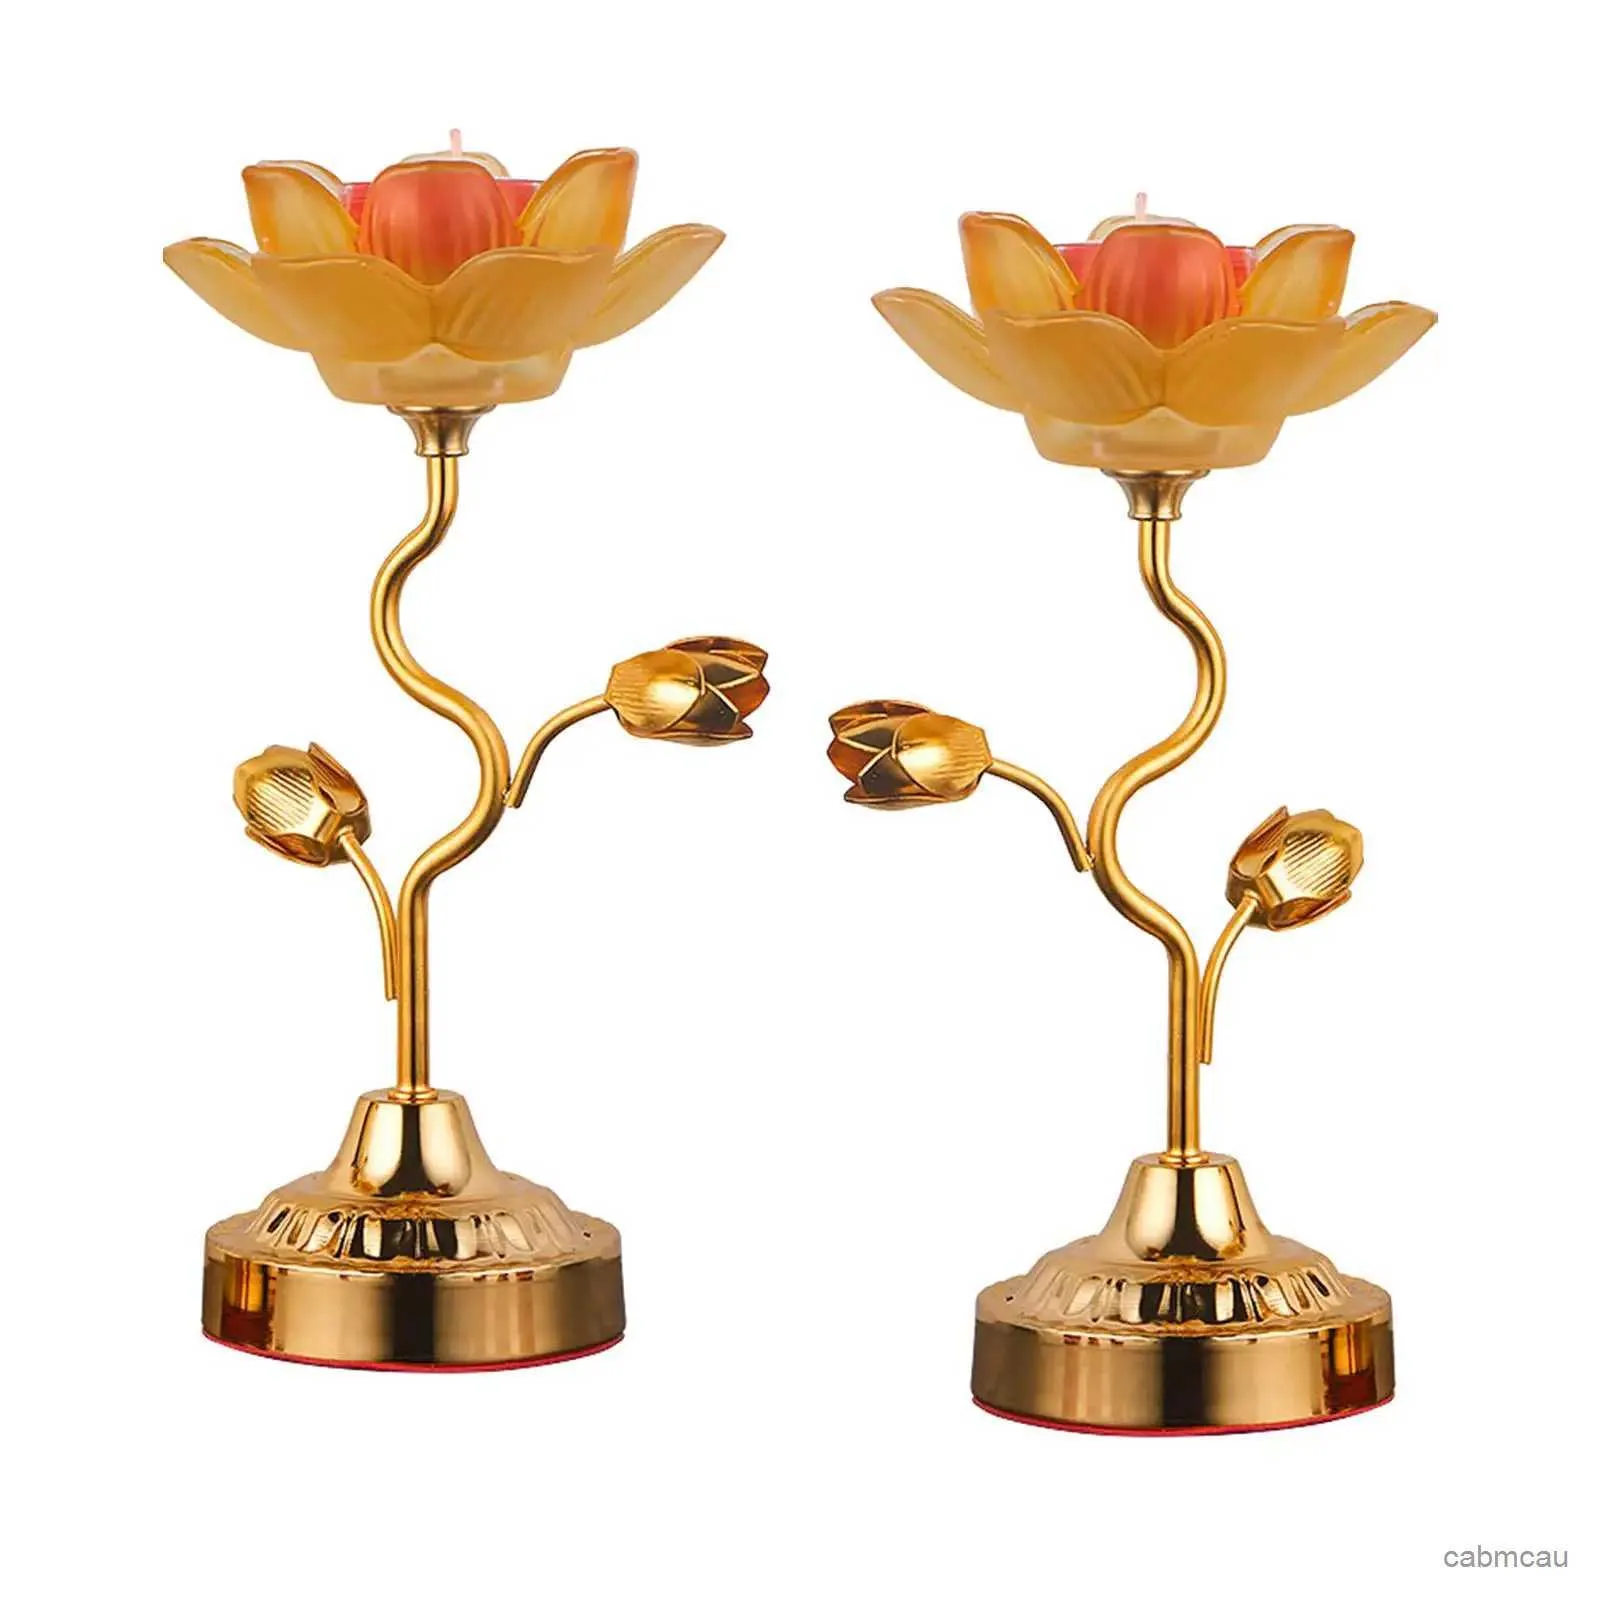 2st Candle Holders 2x Lotus Ghee Lamp Holder Butter Lamp Holder Candlestick Lotus Lamp för sovrummet